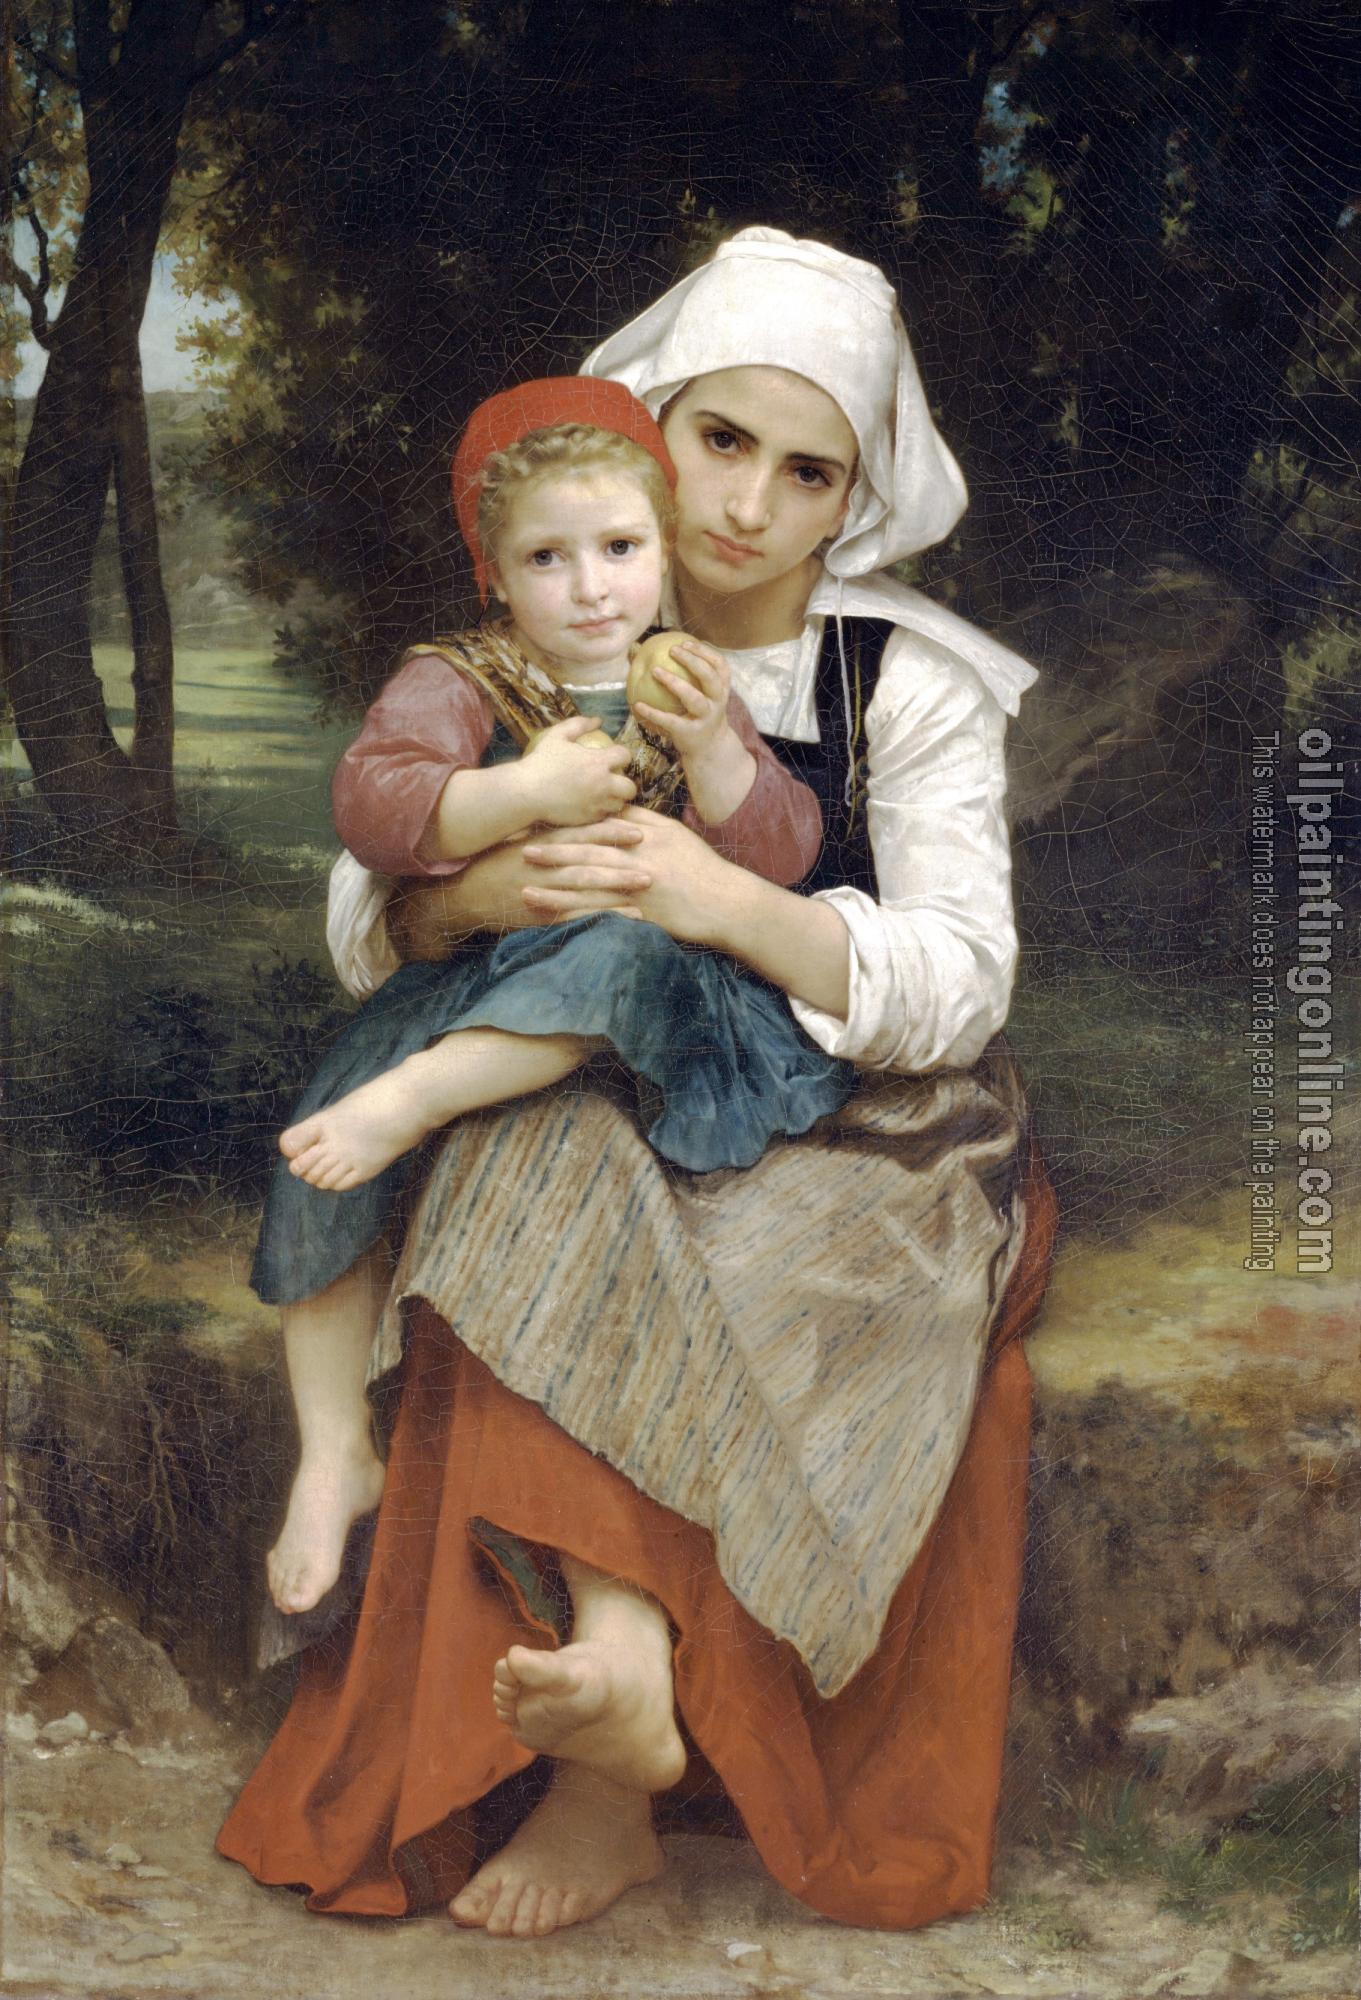 Bouguereau, William-Adolphe - Breton Brother and Sister